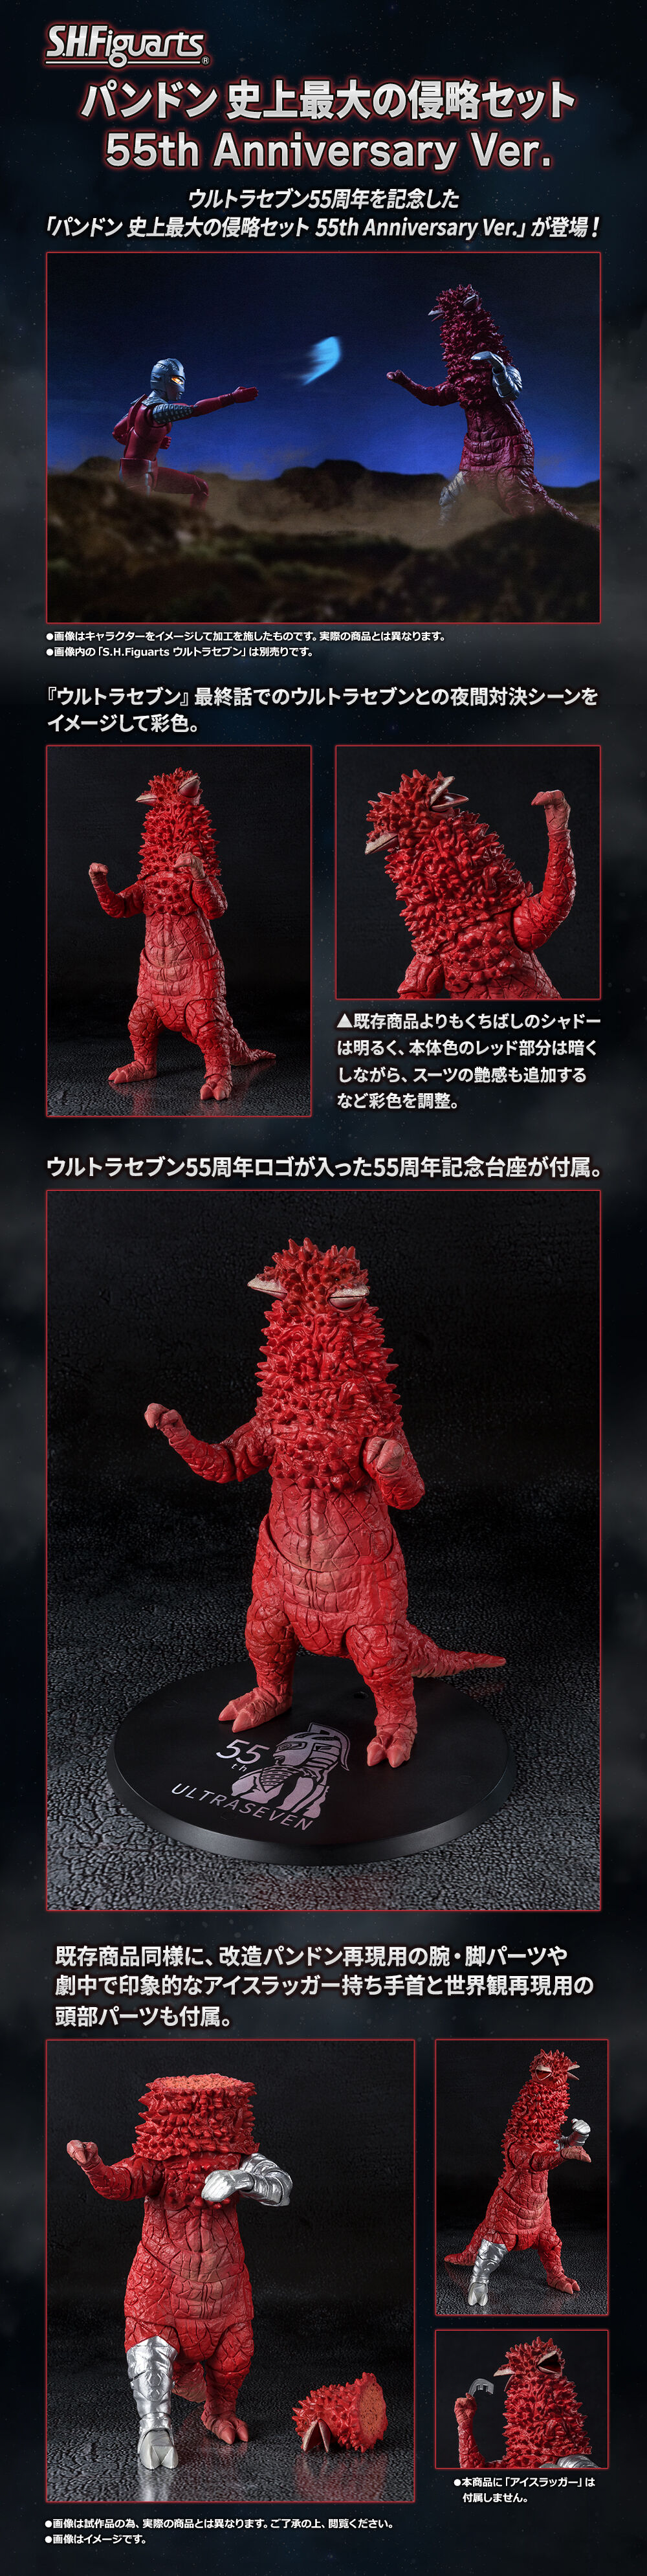 S.H.Figuarts PANDON The biggest invasion in history Set 55th Anniversary  Ver. Action Figure